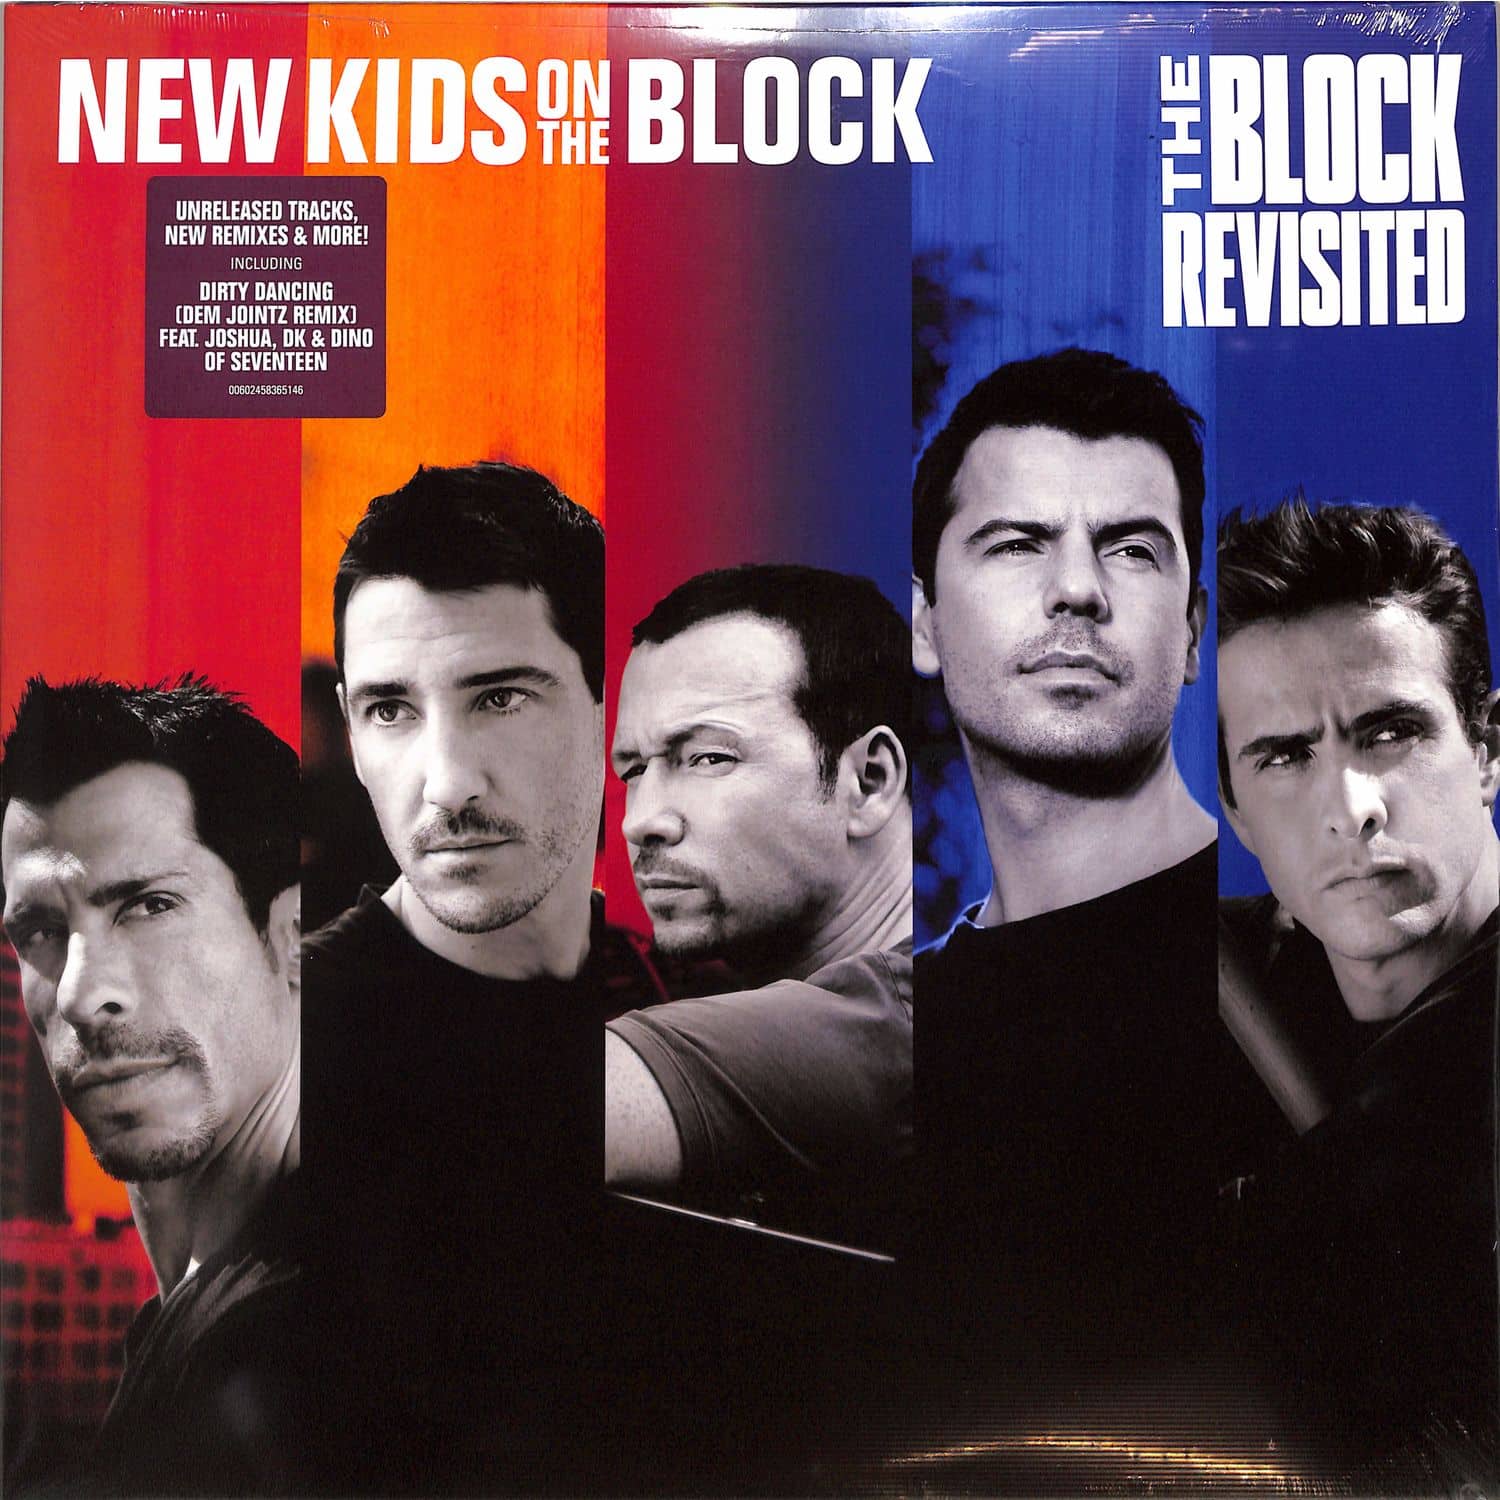 New Kids on the Block - THE BLOCK REVISITED 